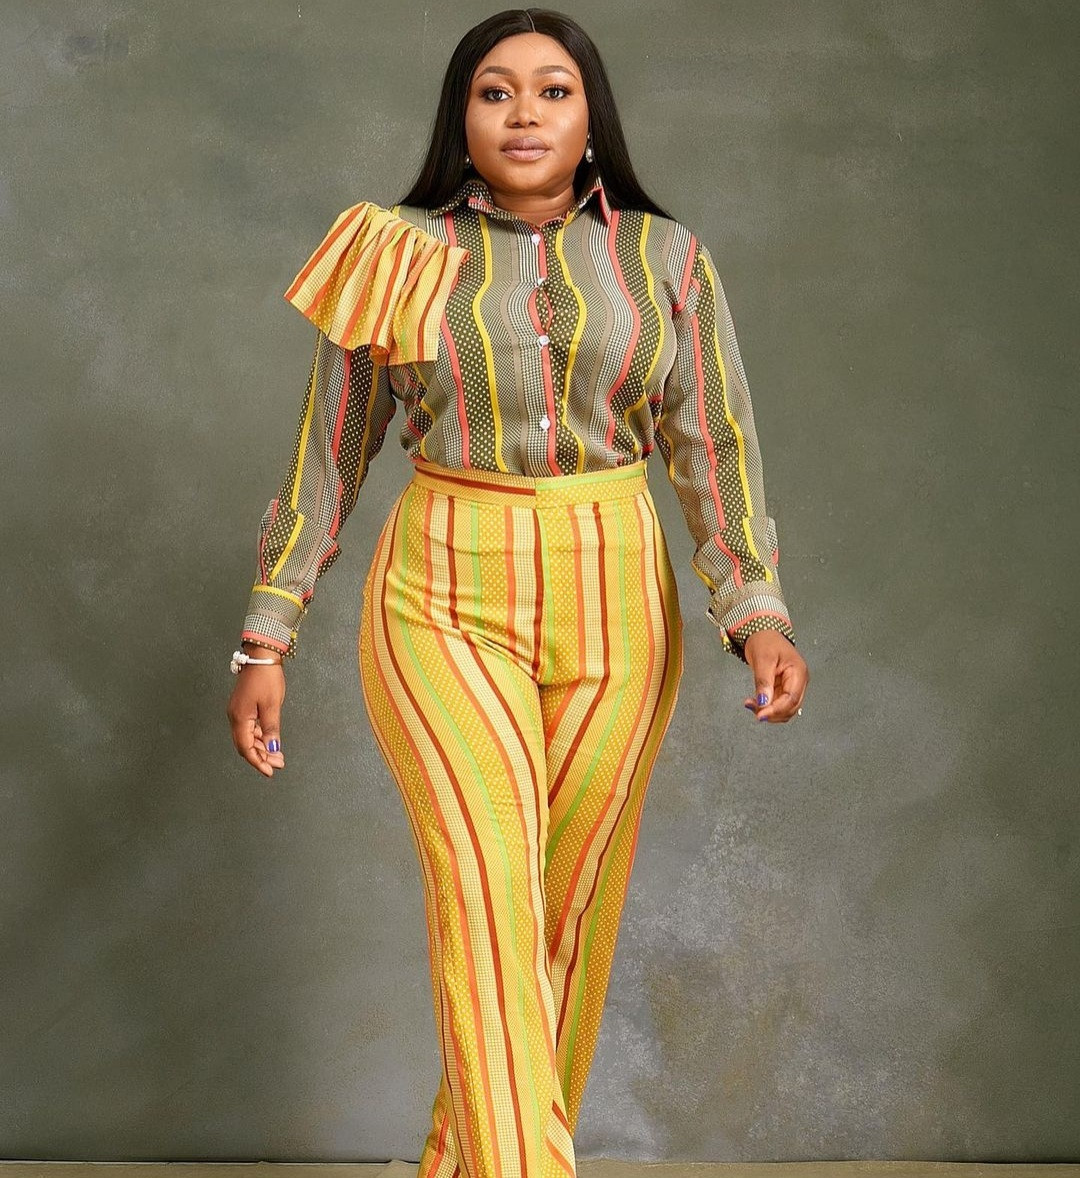 Ruth Kadiri accuses Mo Abudu and Lagos State government of "overlooking" her after she wasn't given any award at the Eko Star Film & TV Awards